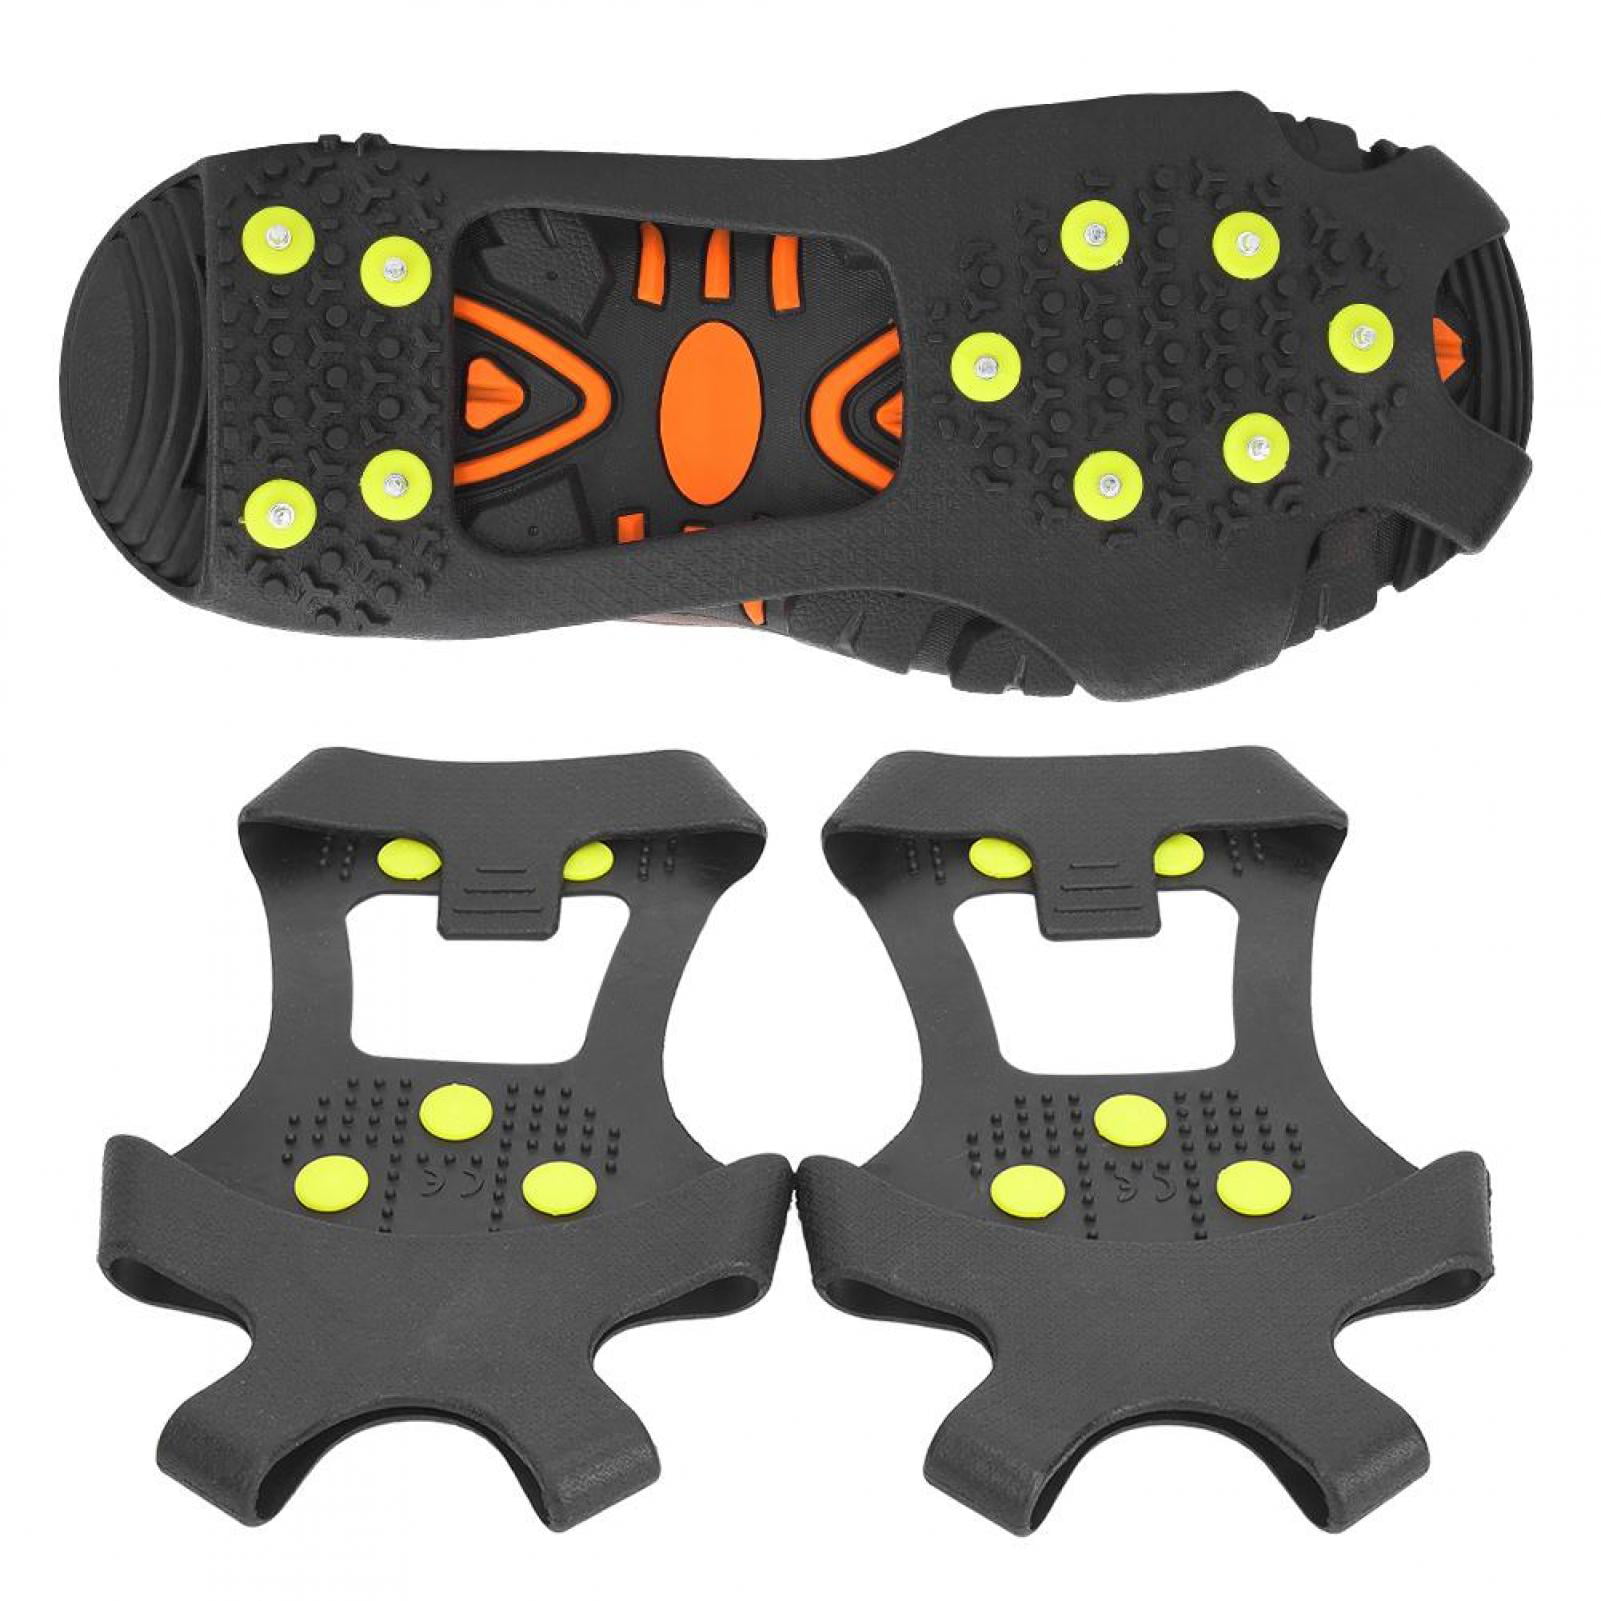 1 Pair 10 Teeth Anti Slip Ice Cleat Shoe Grips Spikes Cleats Crampons for Hiking 